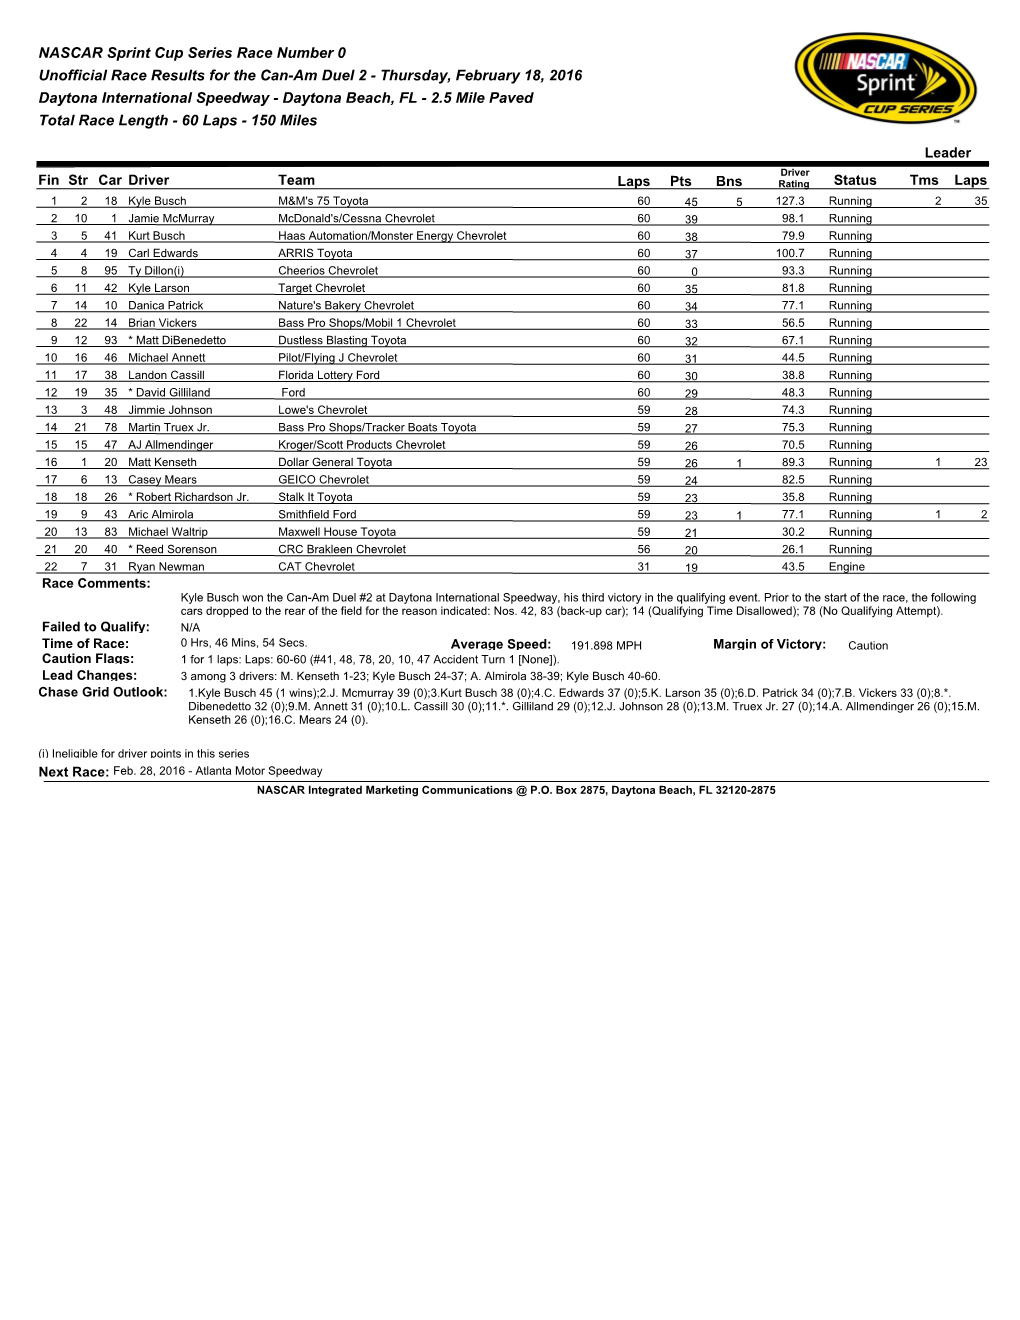 NASCAR Sprint Cup Series Race Number 0 Unofficial Race Results